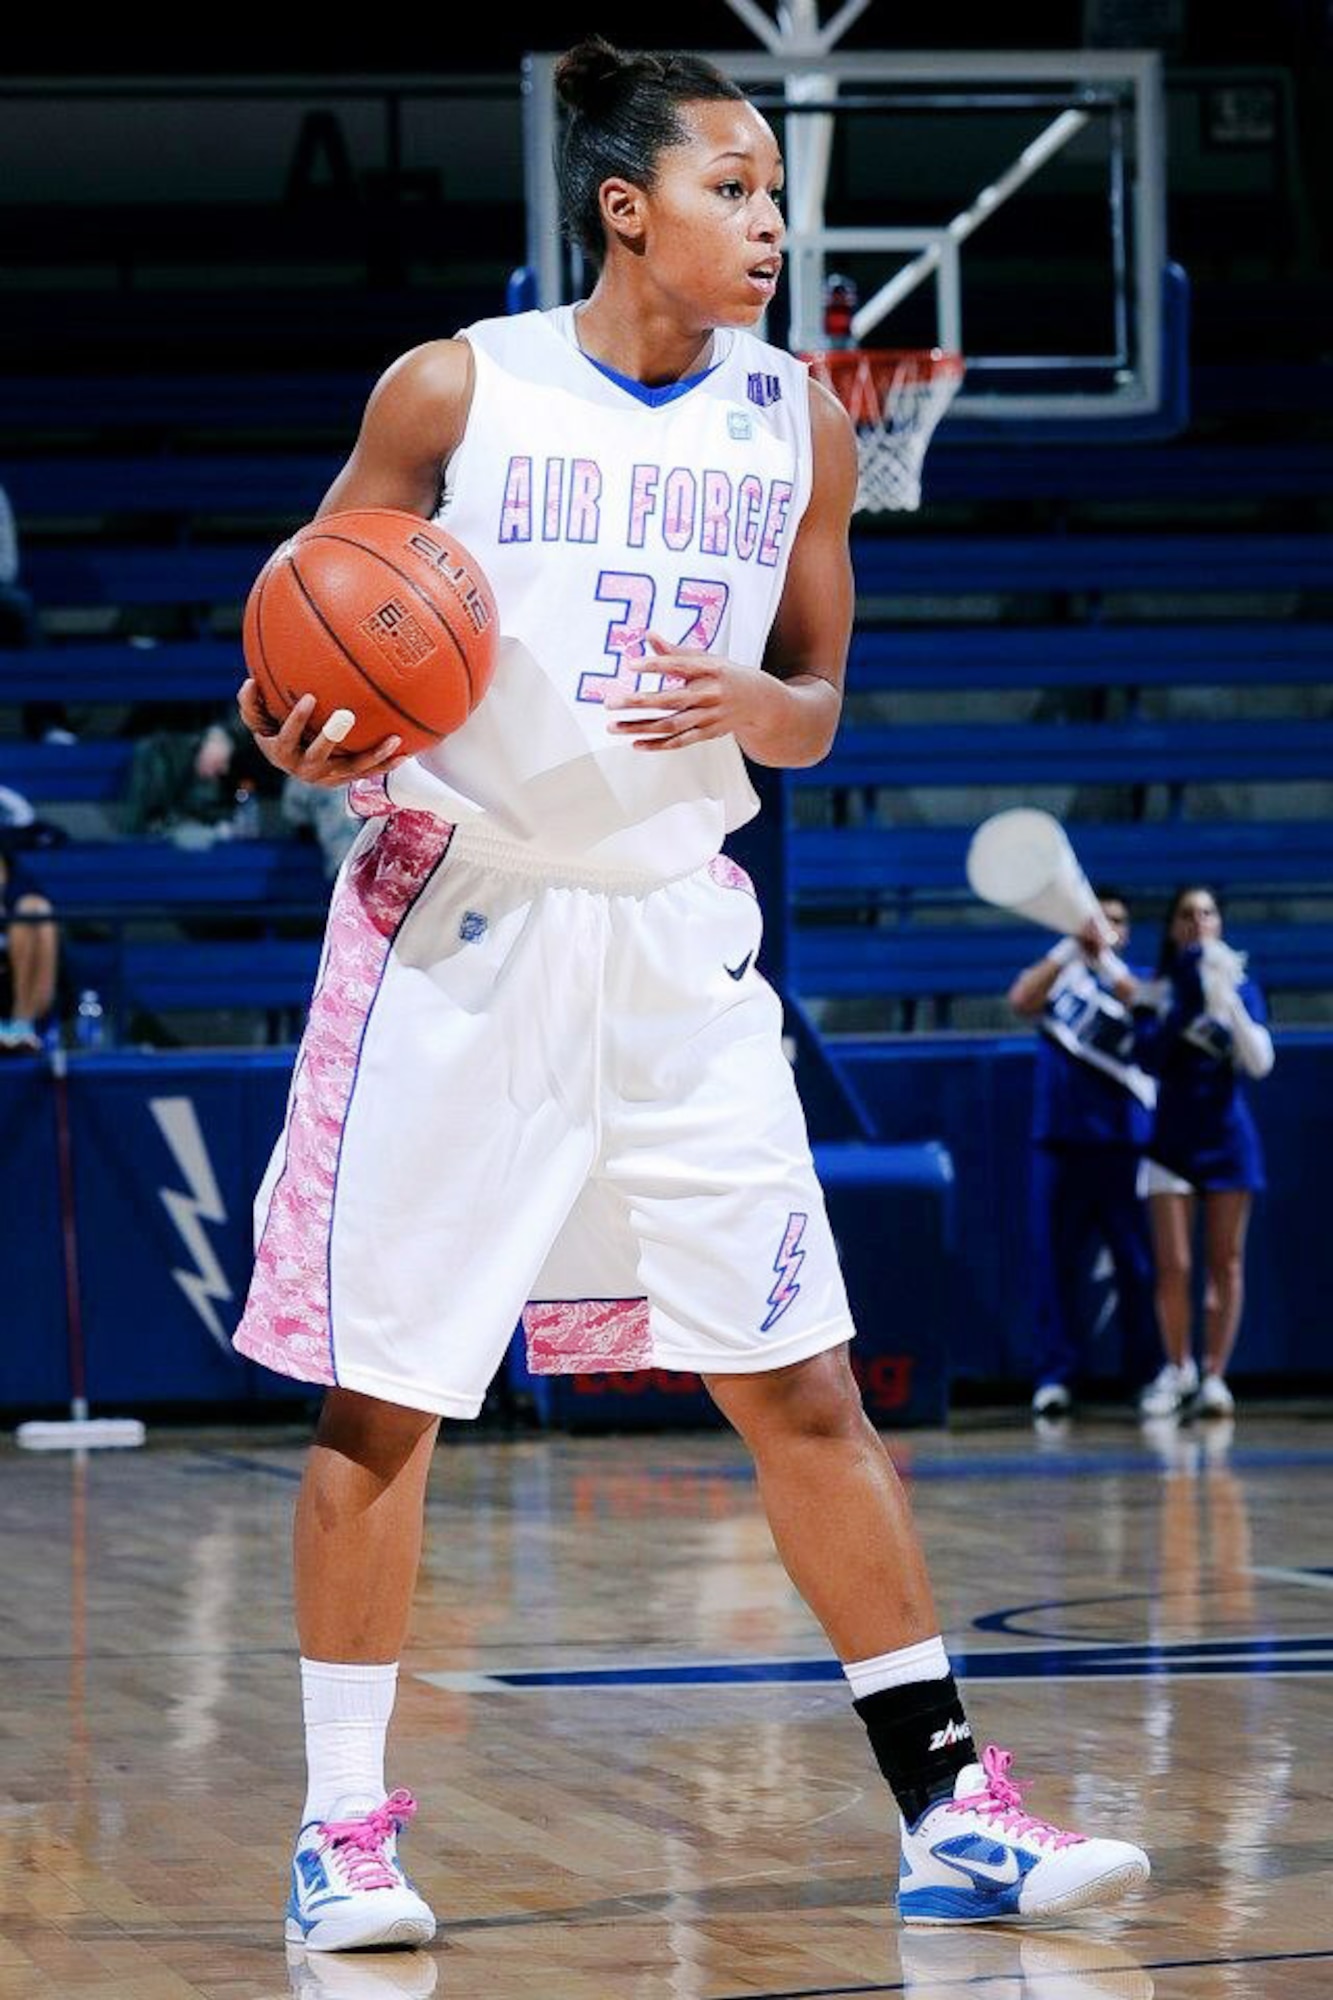 1st Lt. Dymond James, 460th Operations Group staff instructor, participates in a game during her 2012-2013 season. James recently made the U.S. Air Force Women’s Basketball Team and will be competing in a tournament against other branches of service. (Courtesy photo)